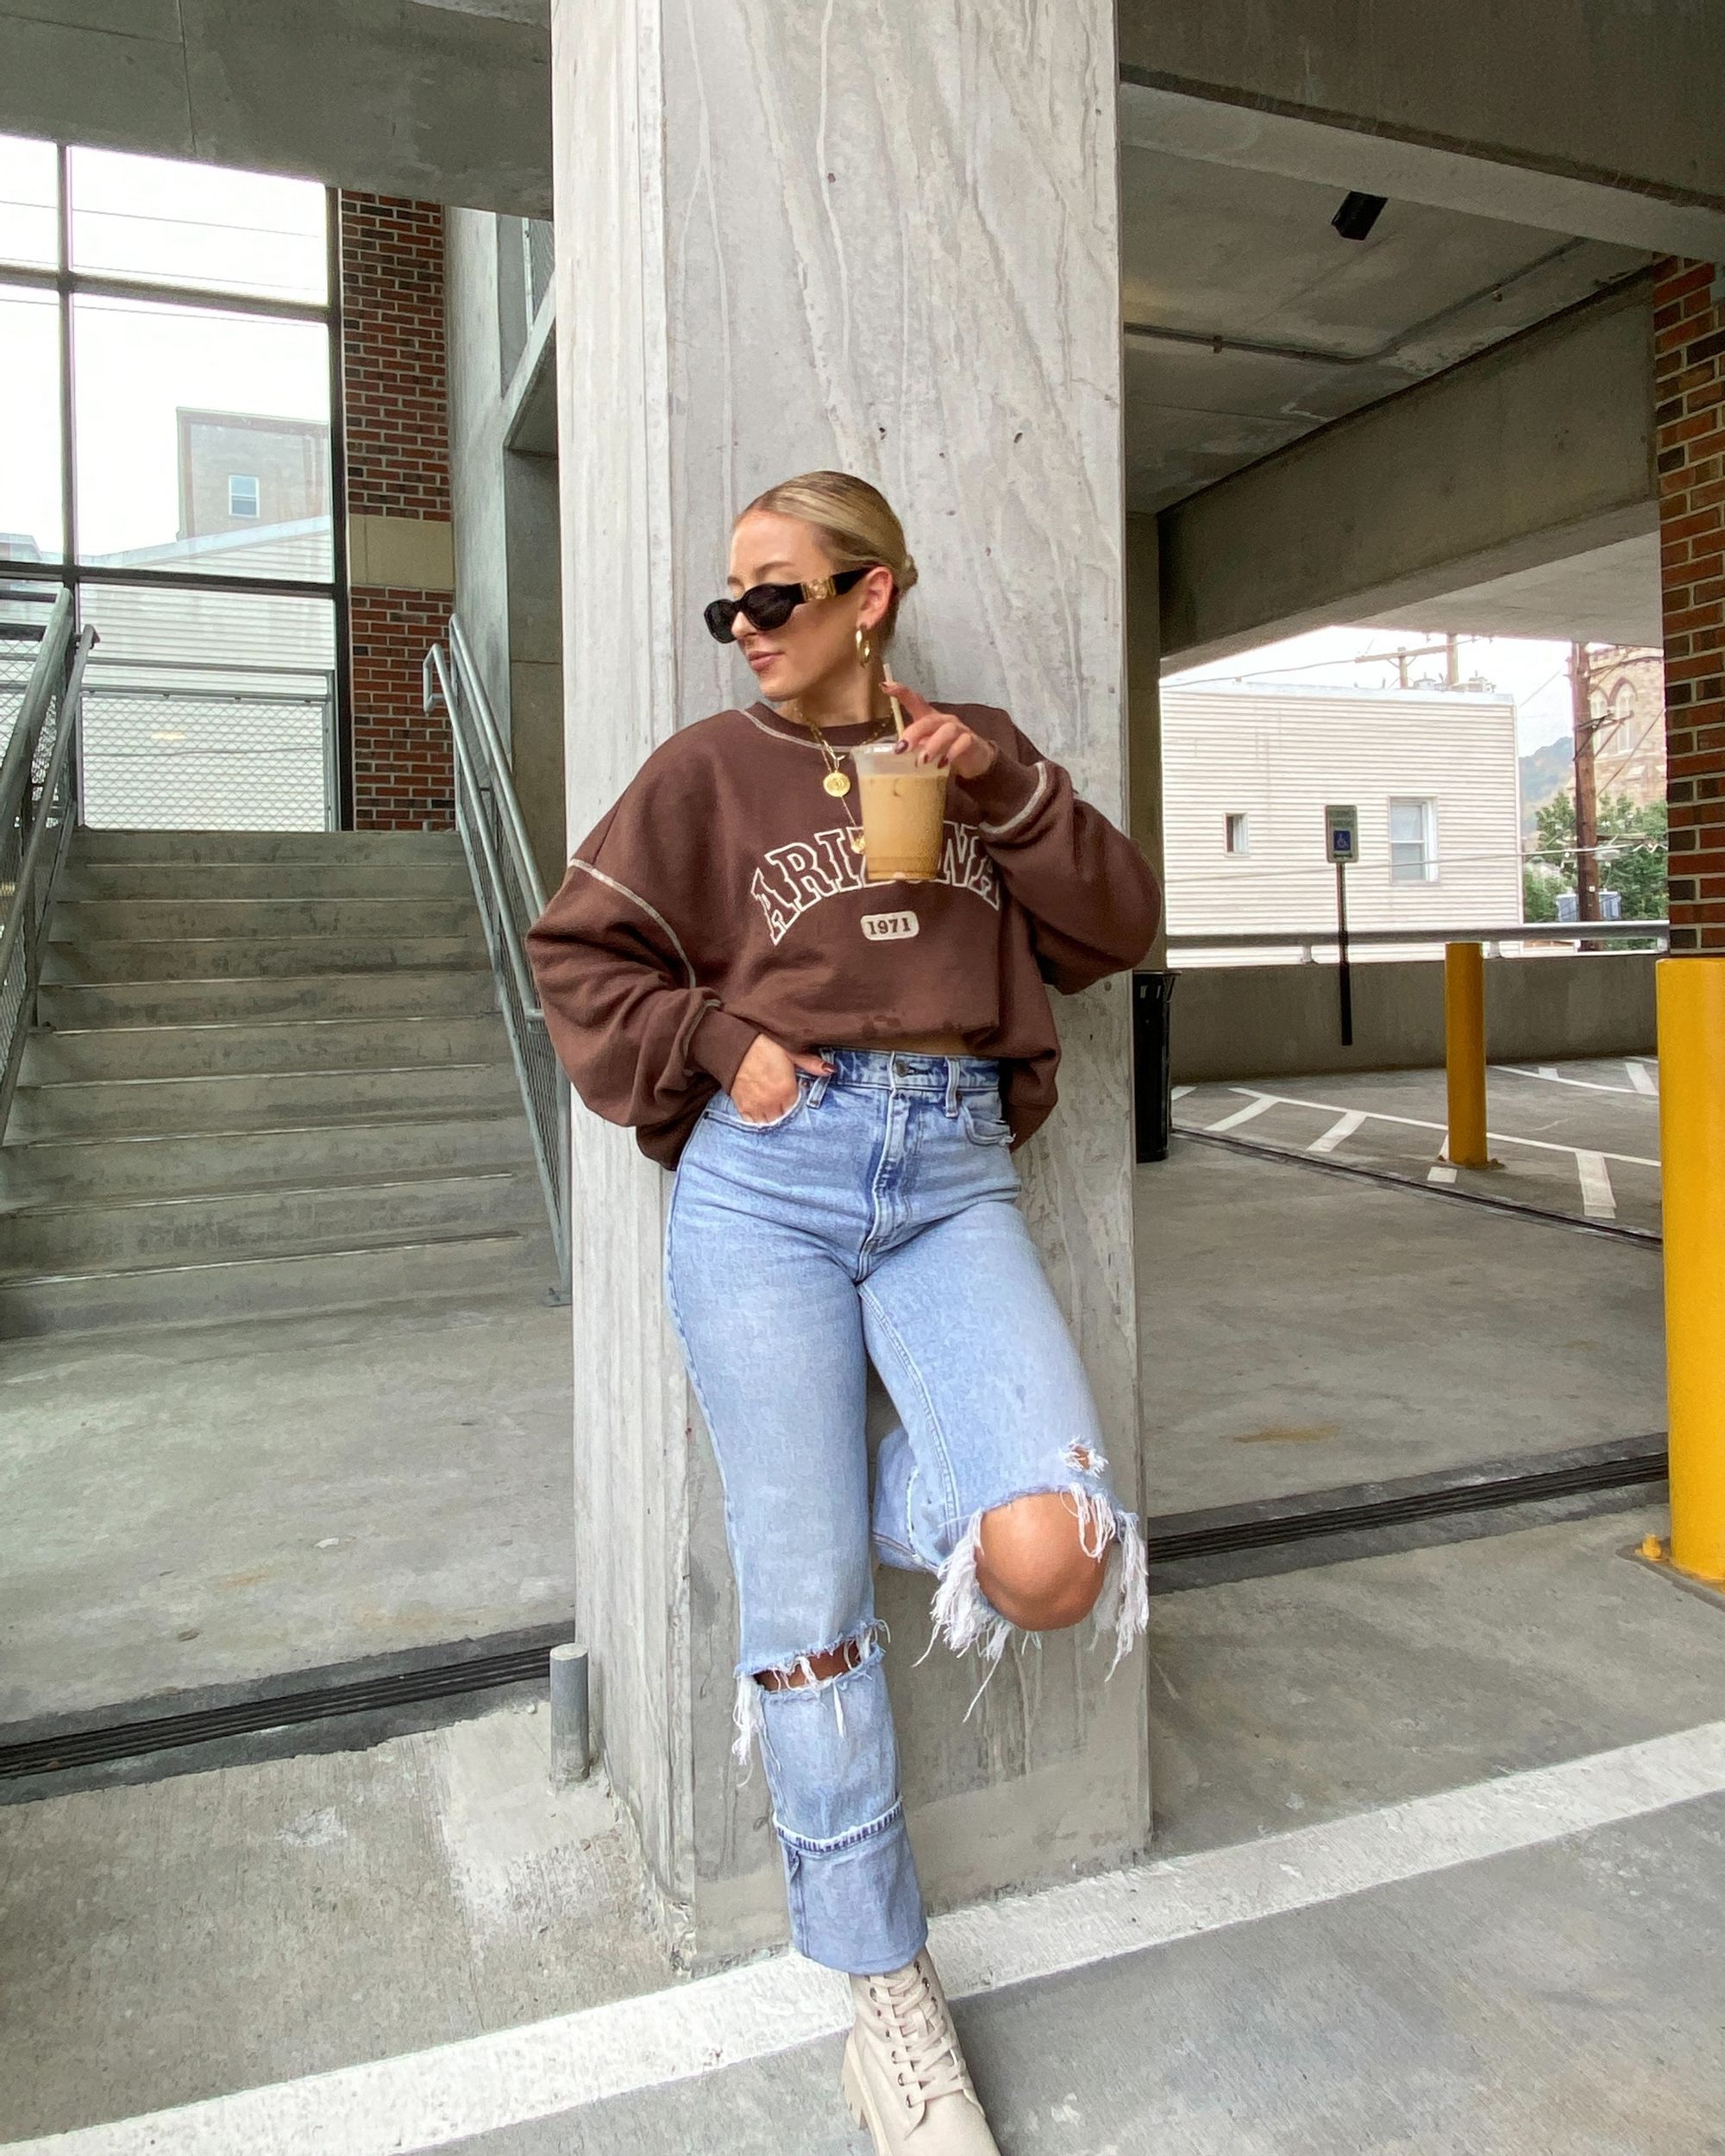 blonde woman wearing ripped jeans and a brown Arizona sweatshirt drinking an iced coffee.